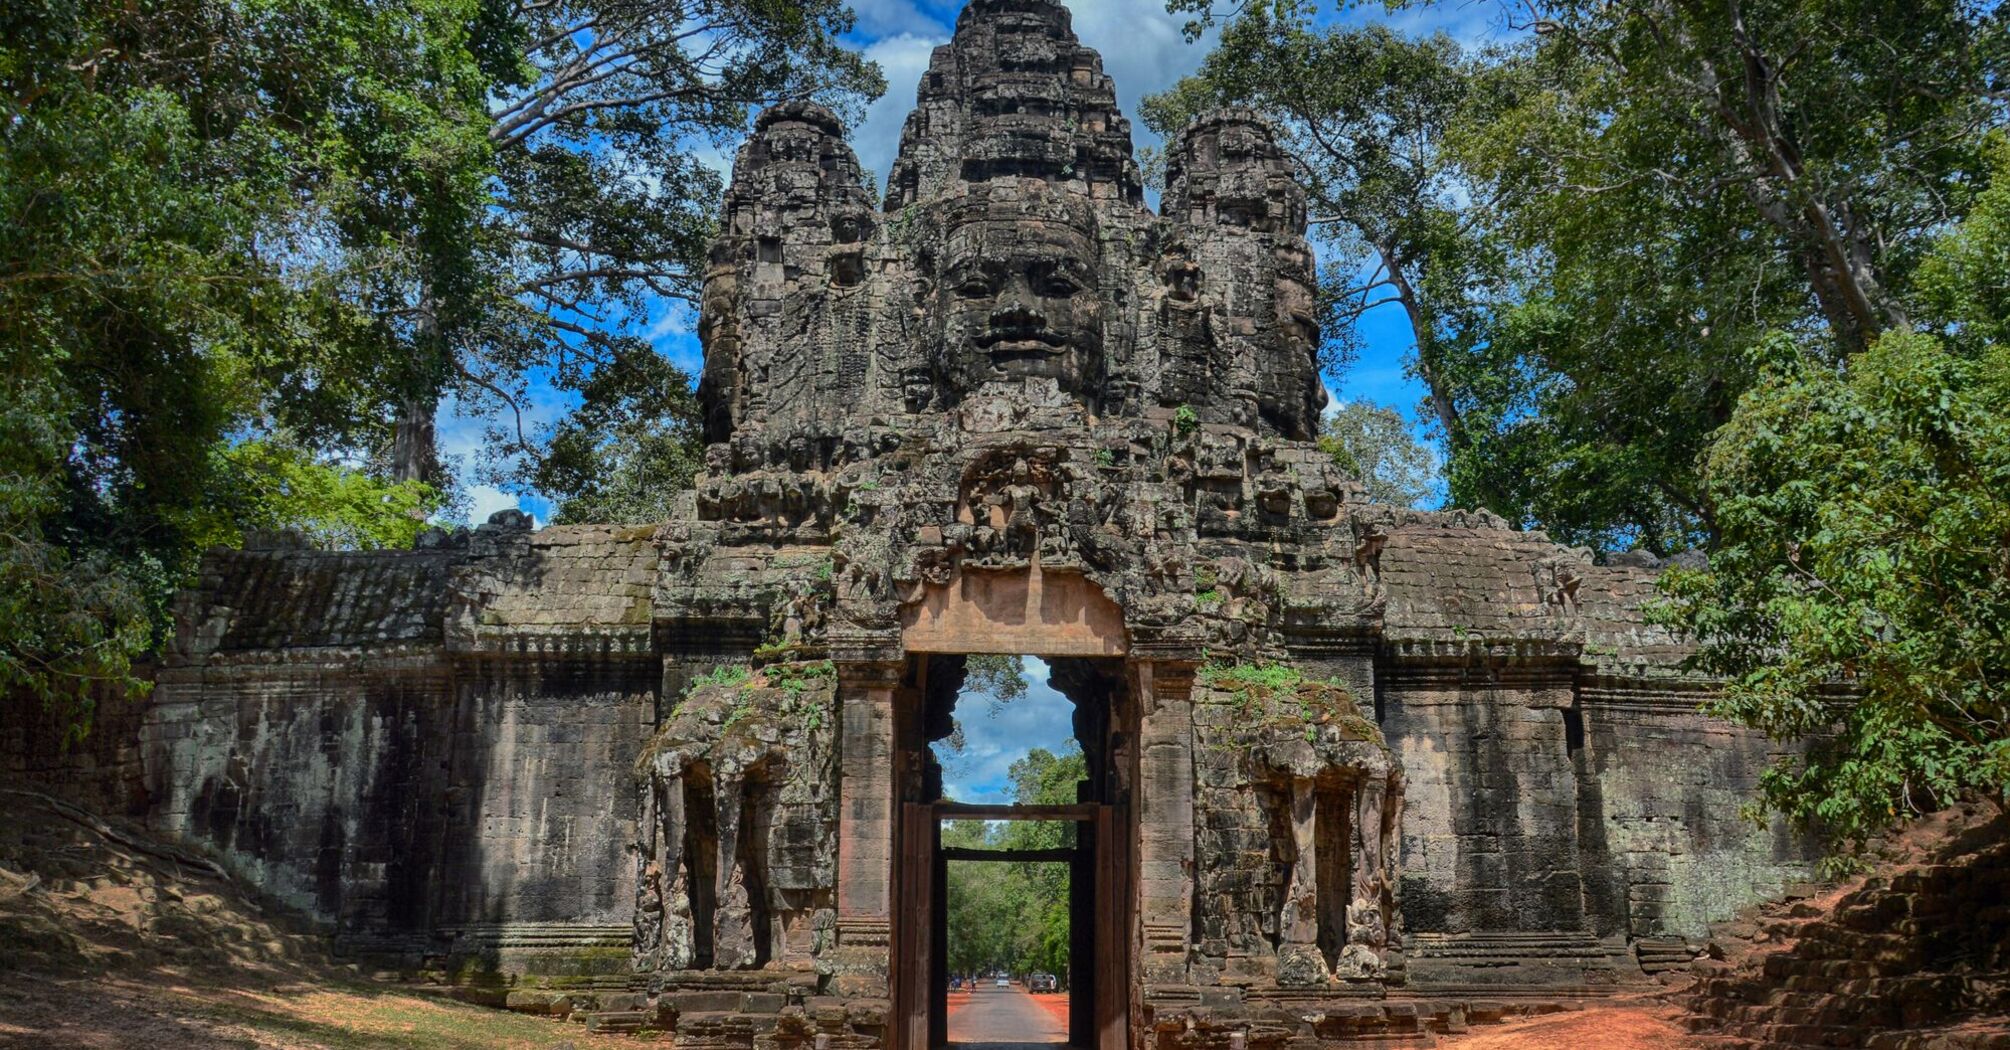 the entrance to an ancient Angkor Wat temple in the jungle